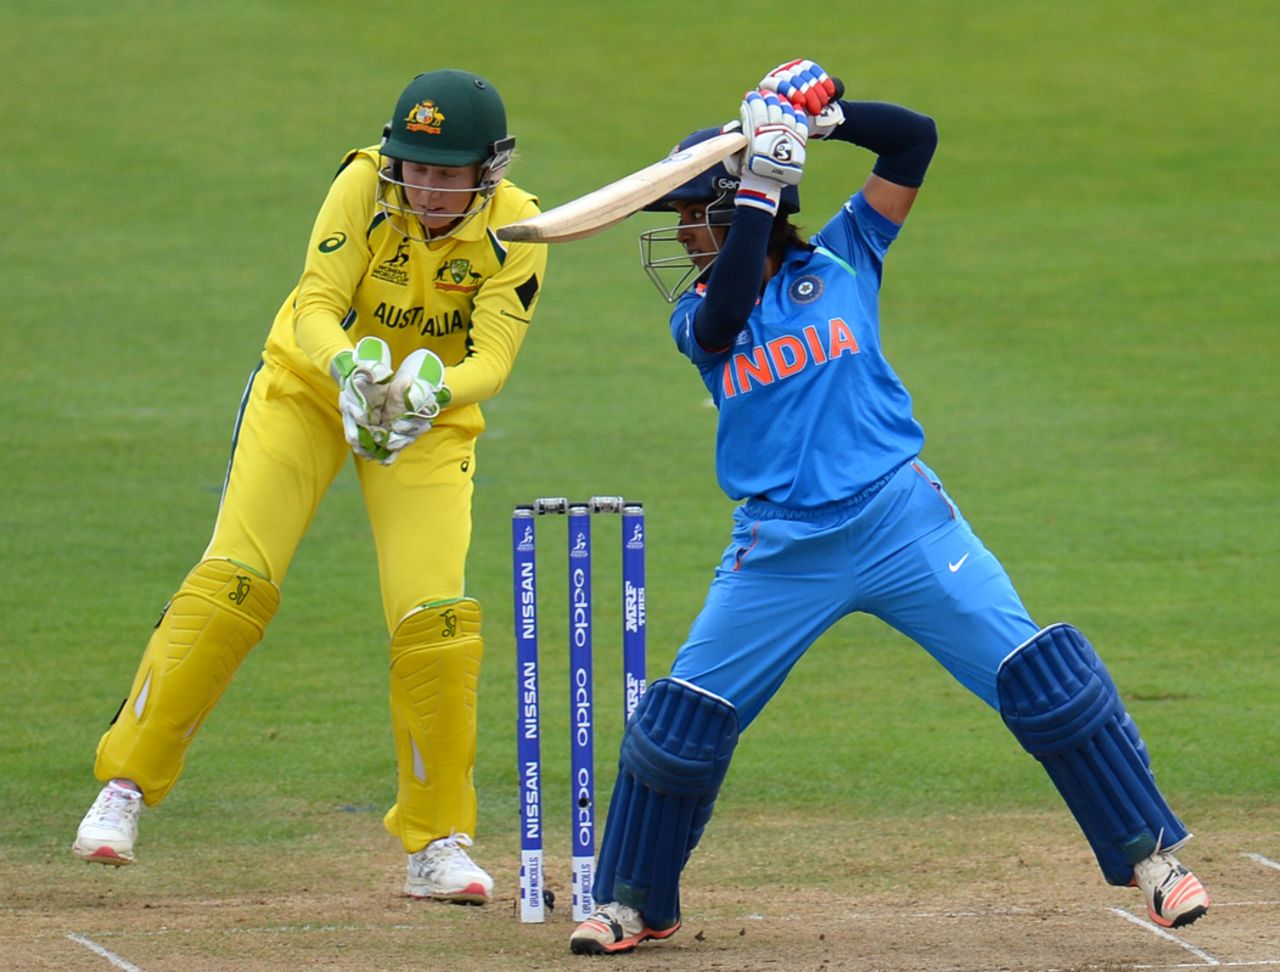 Punam Raut punches off the back foot, Australia v India, Women's World Cup, Bristol, July 12, 2017